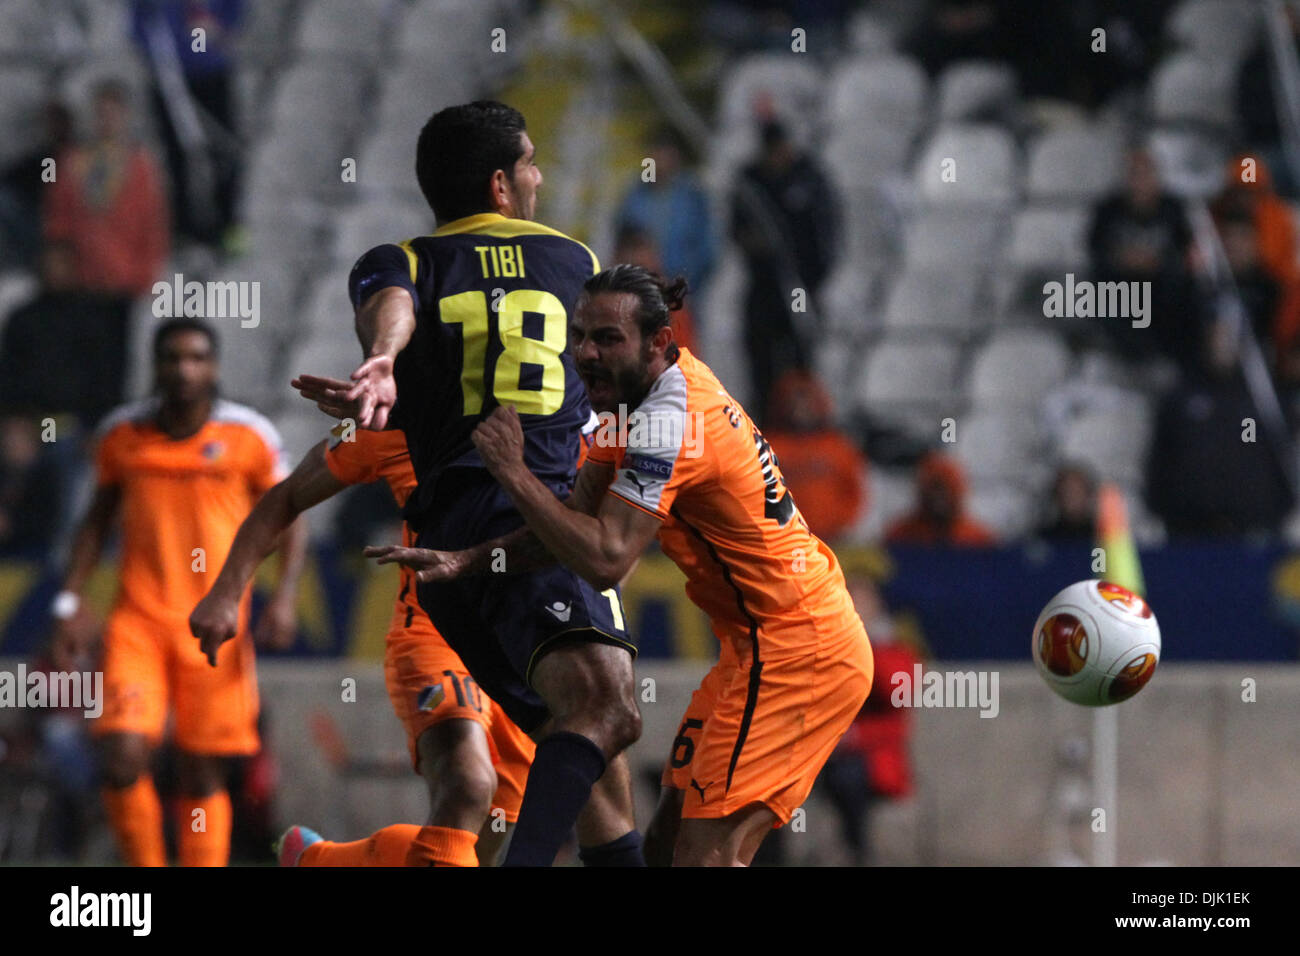 Nicosia, Cyprus. 28th Nov, 2013. Apoel FC player Stathis Aloneftis  and Maccabi Tel Aviv Fc  player Eytan Tibi fight for the ball during their Europa League  soccer match at GSP stadium in Nicosia, Cyprus, Thursday, Nov. 28, 2013 Credit:  Yiannis Kourtoglou/Alamy Live News Stock Photo